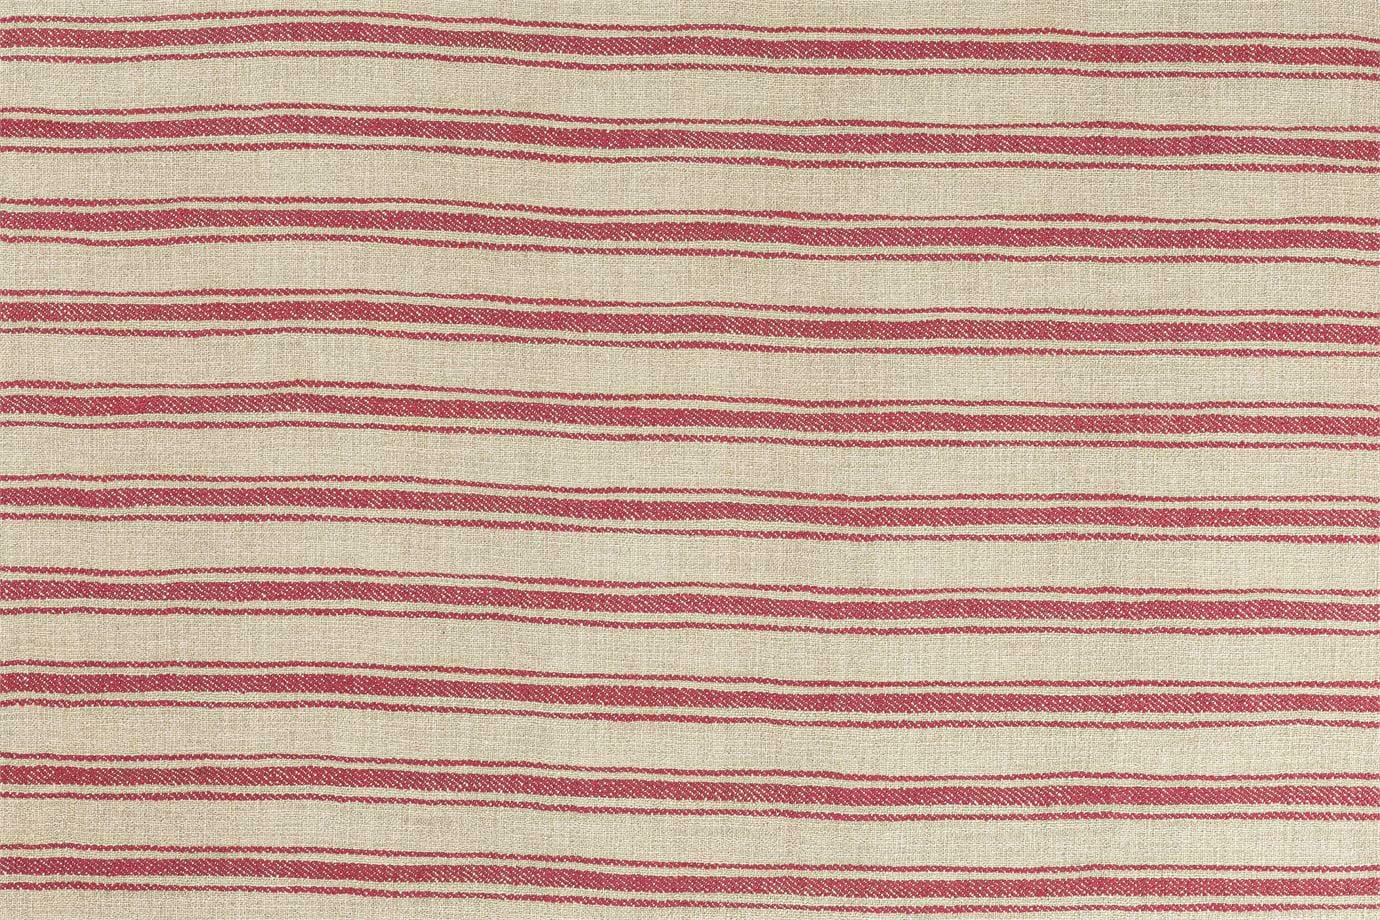 Tissu d'ameublement J4070 PICASSO 006 Rosso